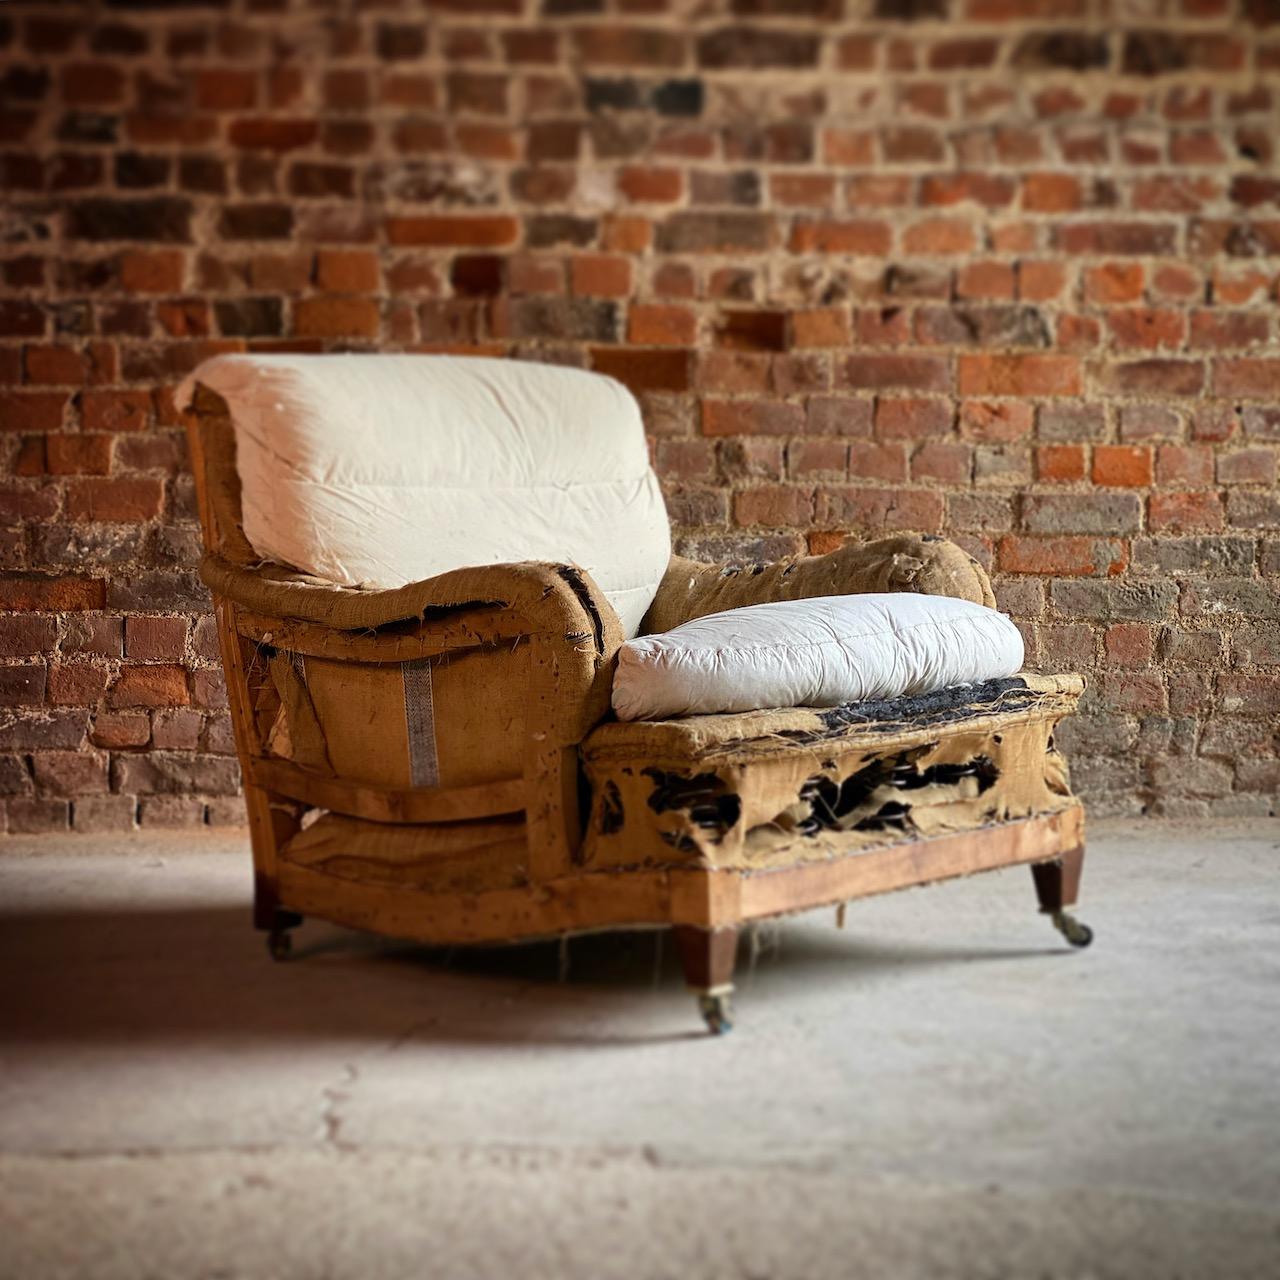 Howard & Sons Bridgewater armchair original, circa 1930s

Magnificent Howard & Sons Ltd Bridgewater armchair, circa 1930s, the loose cushion deep seated ‘Bridgewater’ chair is stamped with serial number 1424 2558 raised on dark beech stained legs